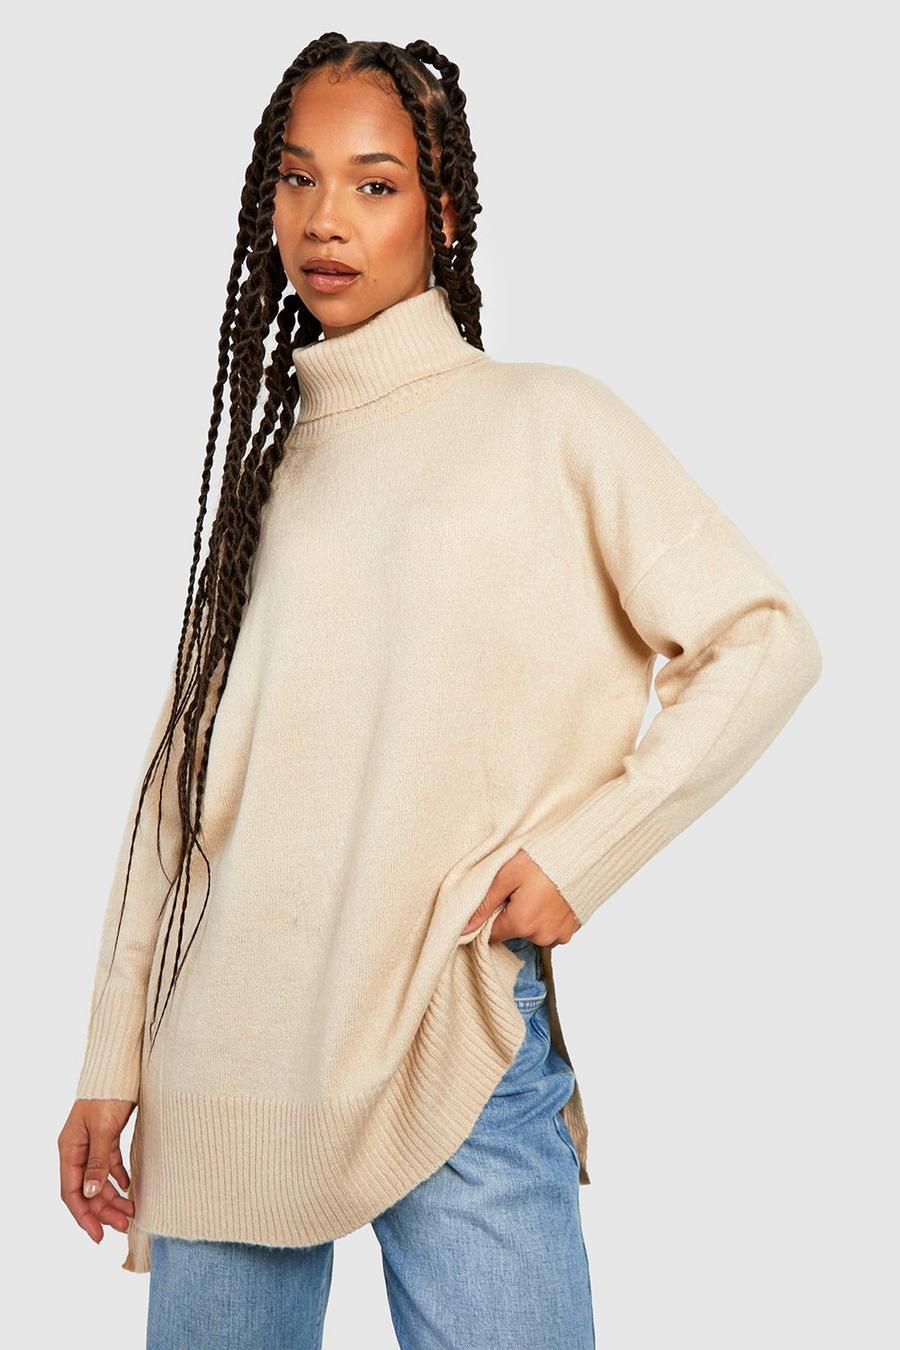 Jersey Tall oversize de mujer con cuello vuelto, Biscuit